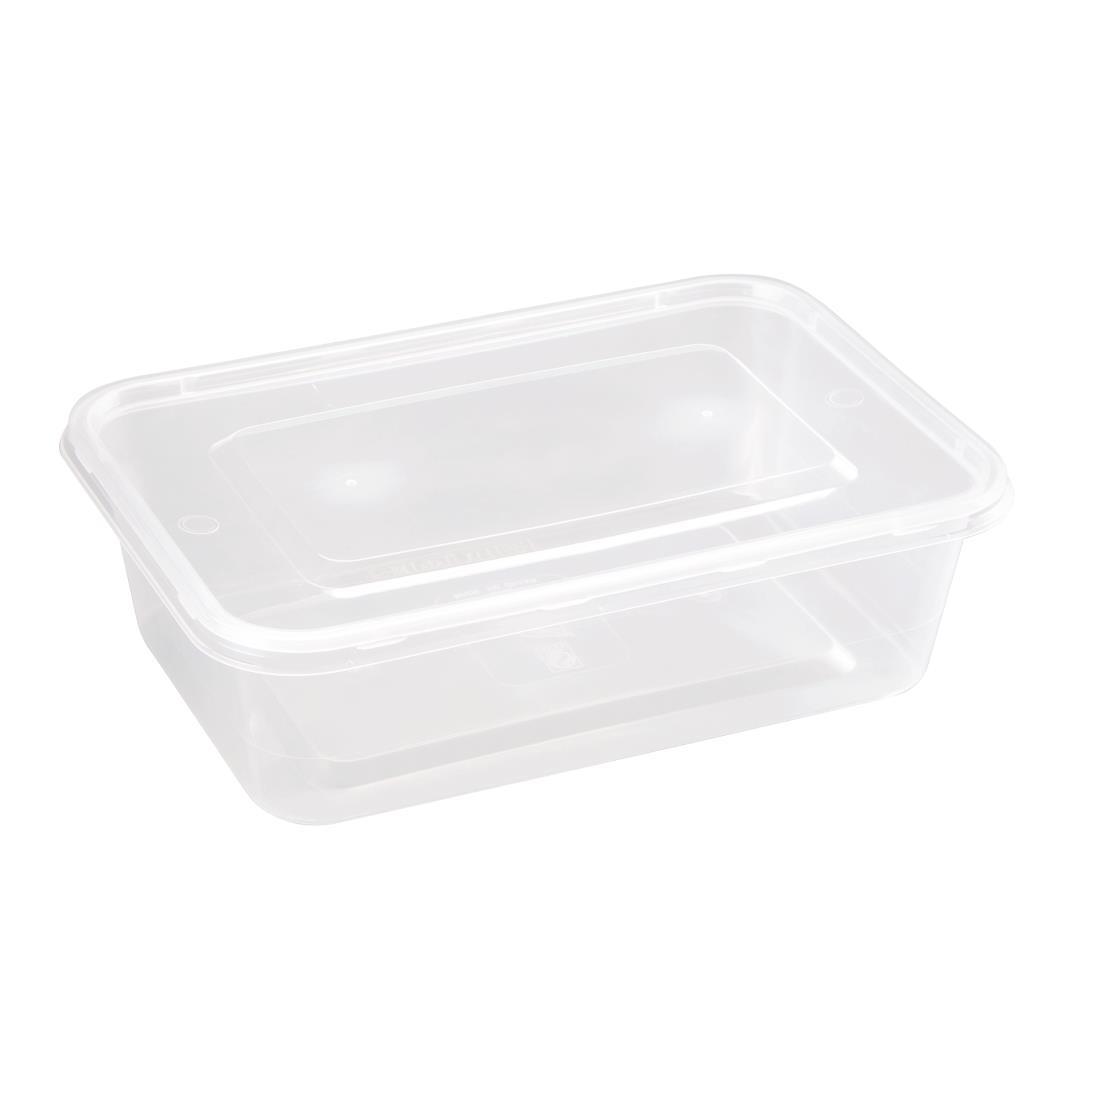 Fiesta Recyclable Plastic Microwavable Containers with Lid Medium 650ml (Pack of 250) - DM182  - 2